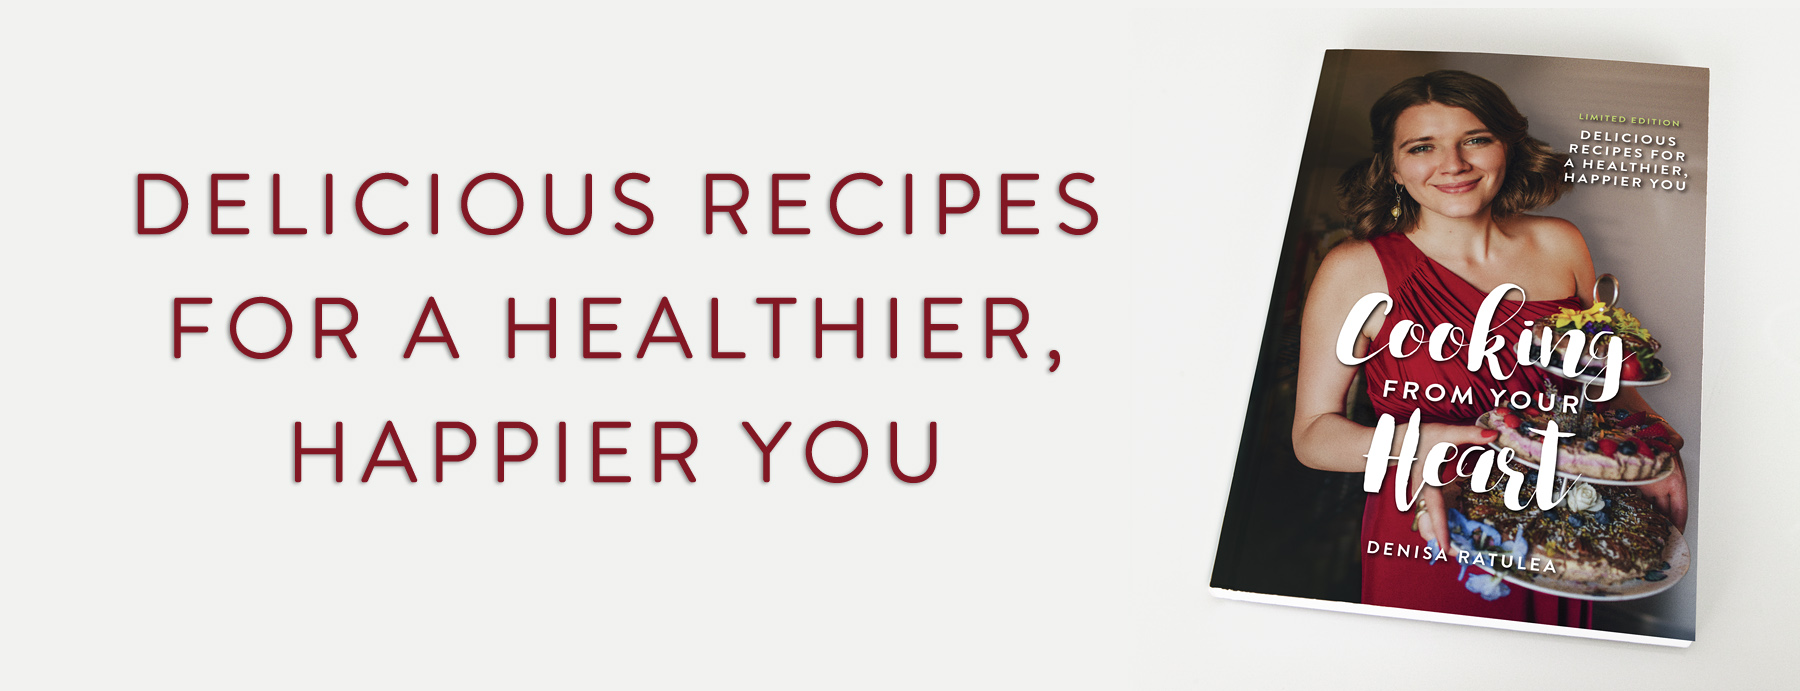 Cooking from your Heart Book - Denisa Ratulea, Second Nature Cookbook